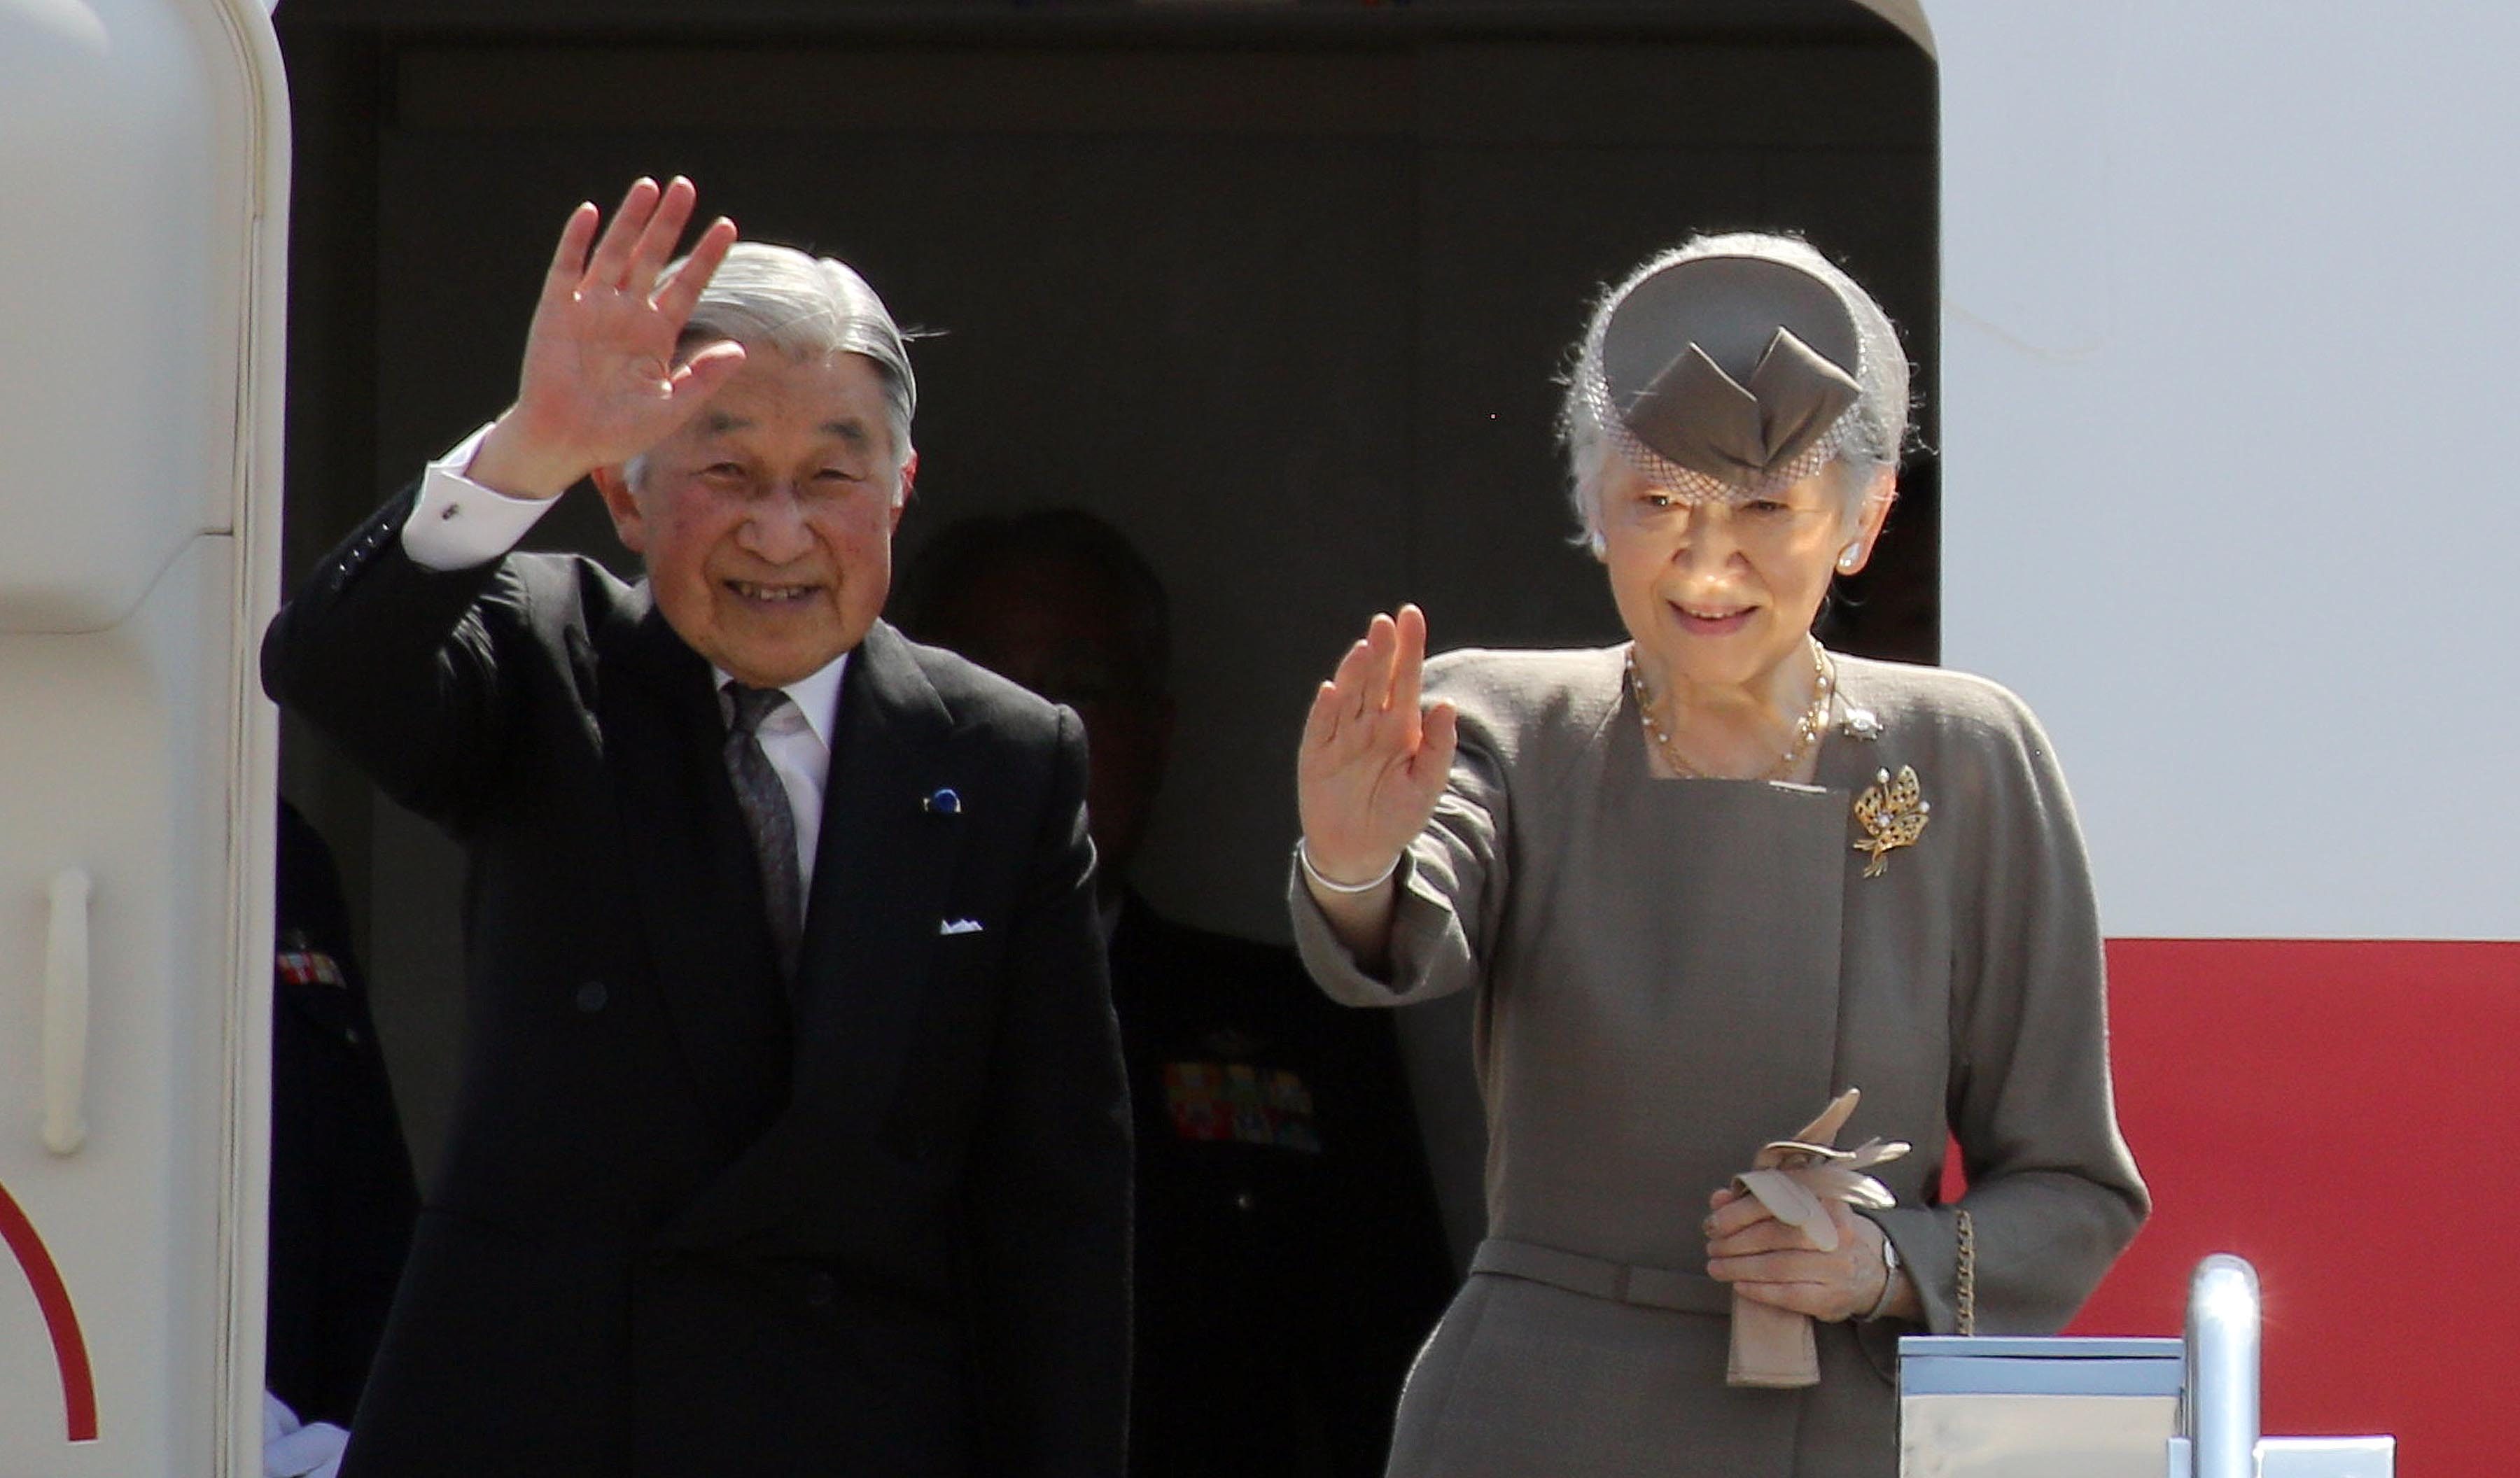 'FUTURE-ORIENTED.' This is how the spokesman for the state visit of Emperor Akihito and Empress Michiko describes their majesties' trip to the Philippines. Here, they wave at the send-off party at the Ninoy Aquino International Airport on January 30, 2016. Photo by Joseph Vidal/Malacañang Photo Bureau  